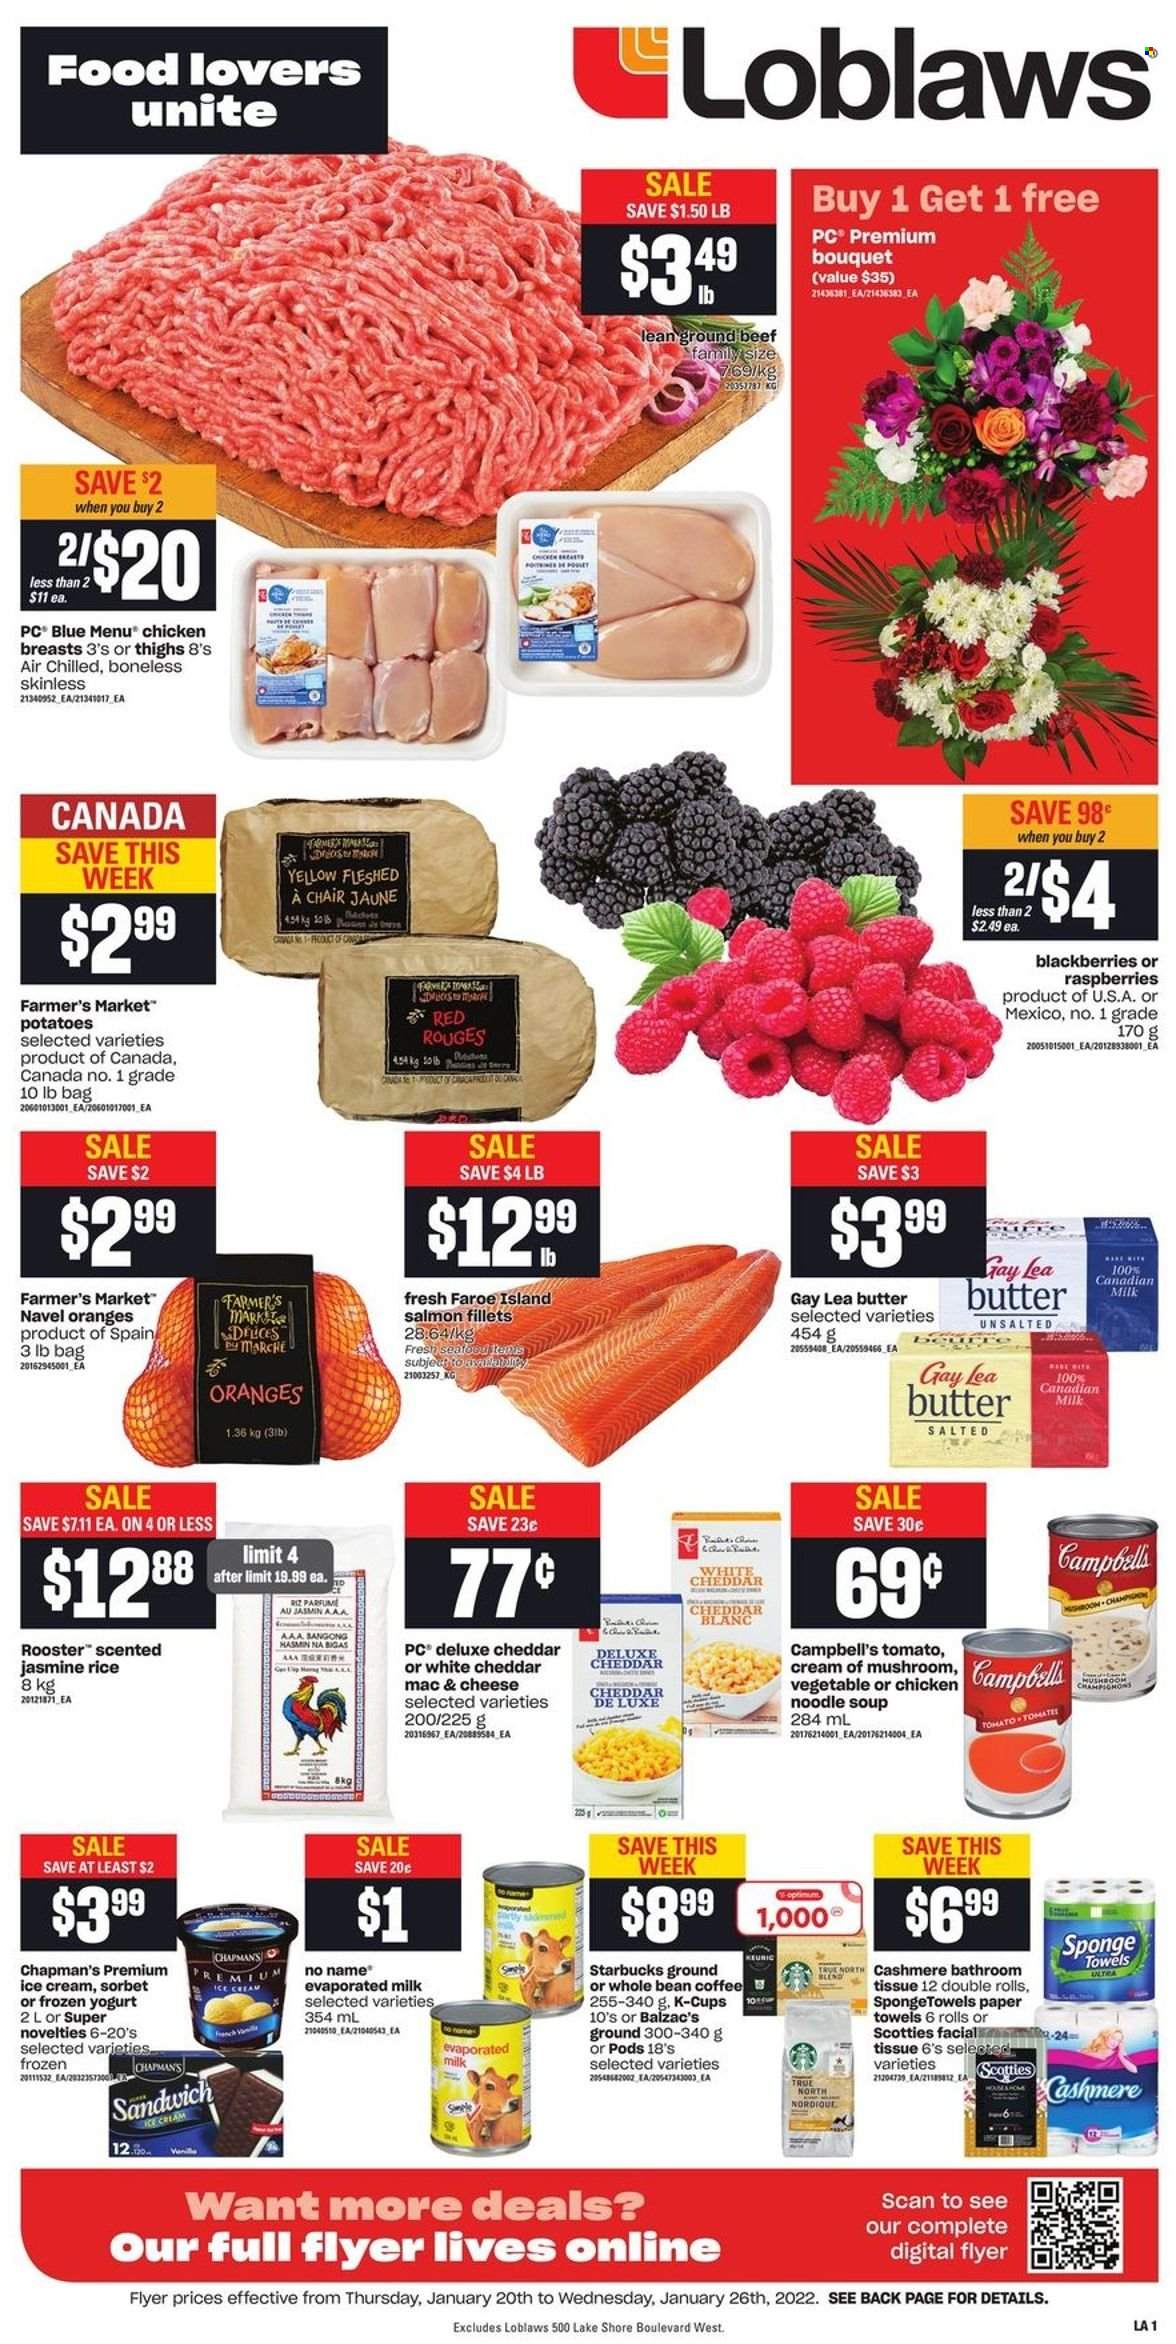 thumbnail - Loblaws Flyer - January 20, 2022 - January 26, 2022 - Sales products - potatoes, blackberries, navel oranges, salmon, salmon fillet, No Name, Campbell's, sandwich, soup, noodles cup, noodles, cheddar, yoghurt, evaporated milk, butter, ice cream, rice, jasmine rice, coffee, coffee capsules, Starbucks, K-Cups, chicken breasts, beef meat, ground beef, tissues, kitchen towels, paper towels, oranges. Page 1.